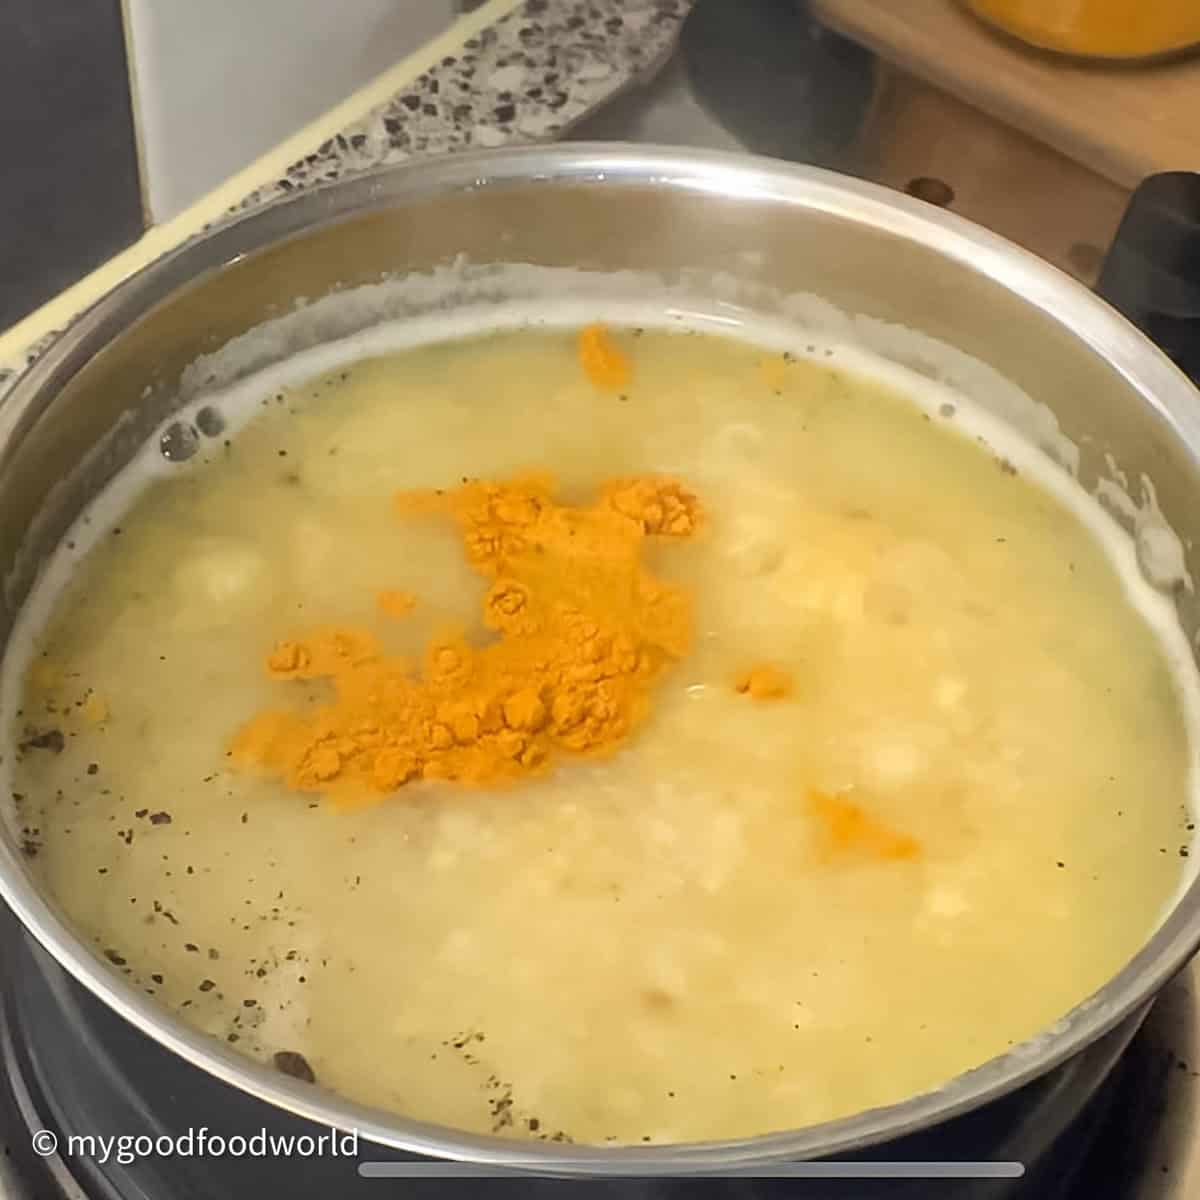 A pot of yellow soup with orange seasoning on a black stovetop. A yellow spatula or spoon is on the right. 